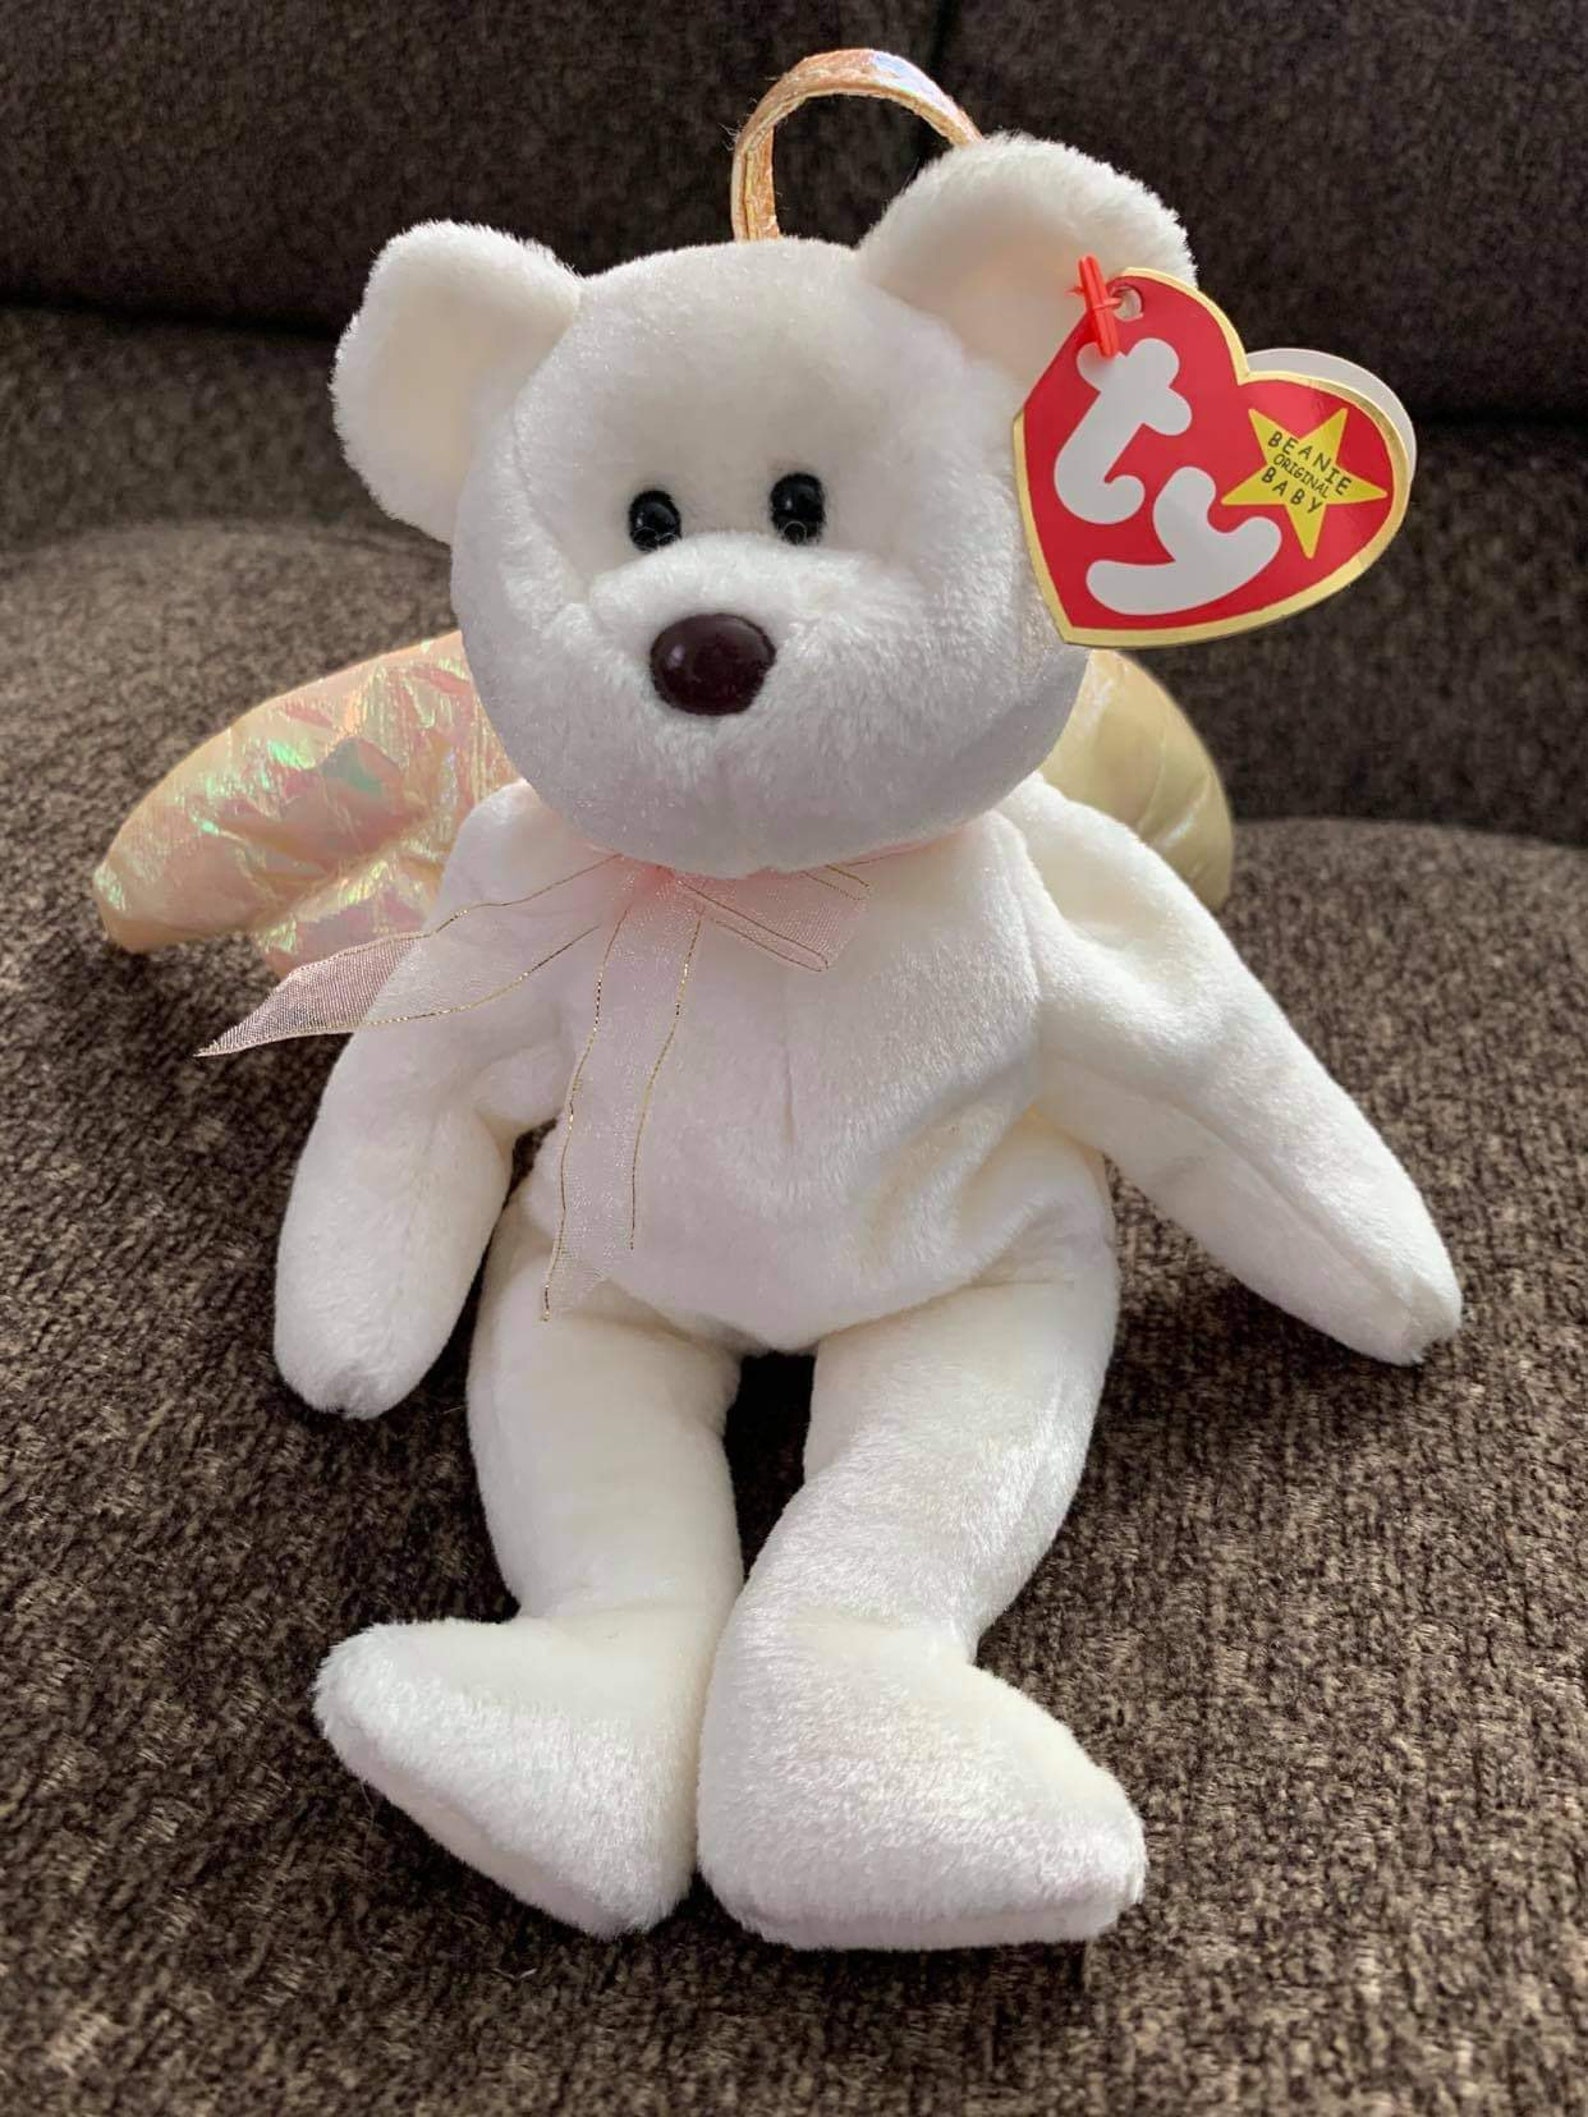 1998 Halo beanie baby collection | Etsy